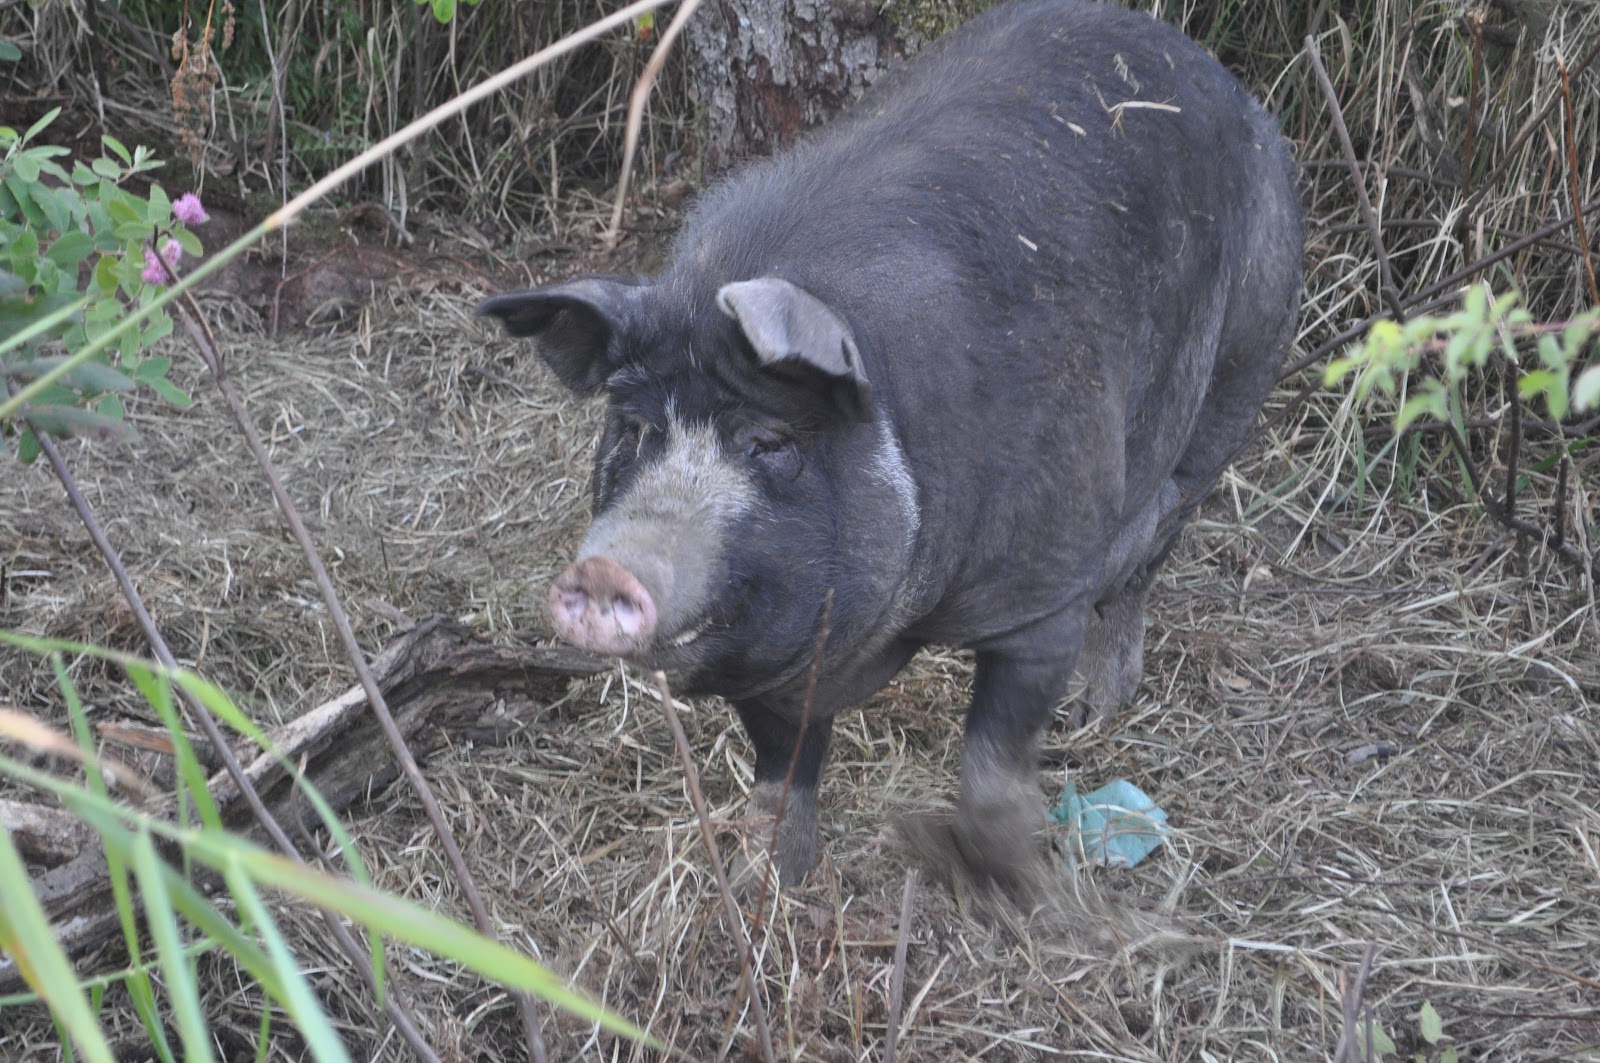 meat: The mean white-faced pig farrows